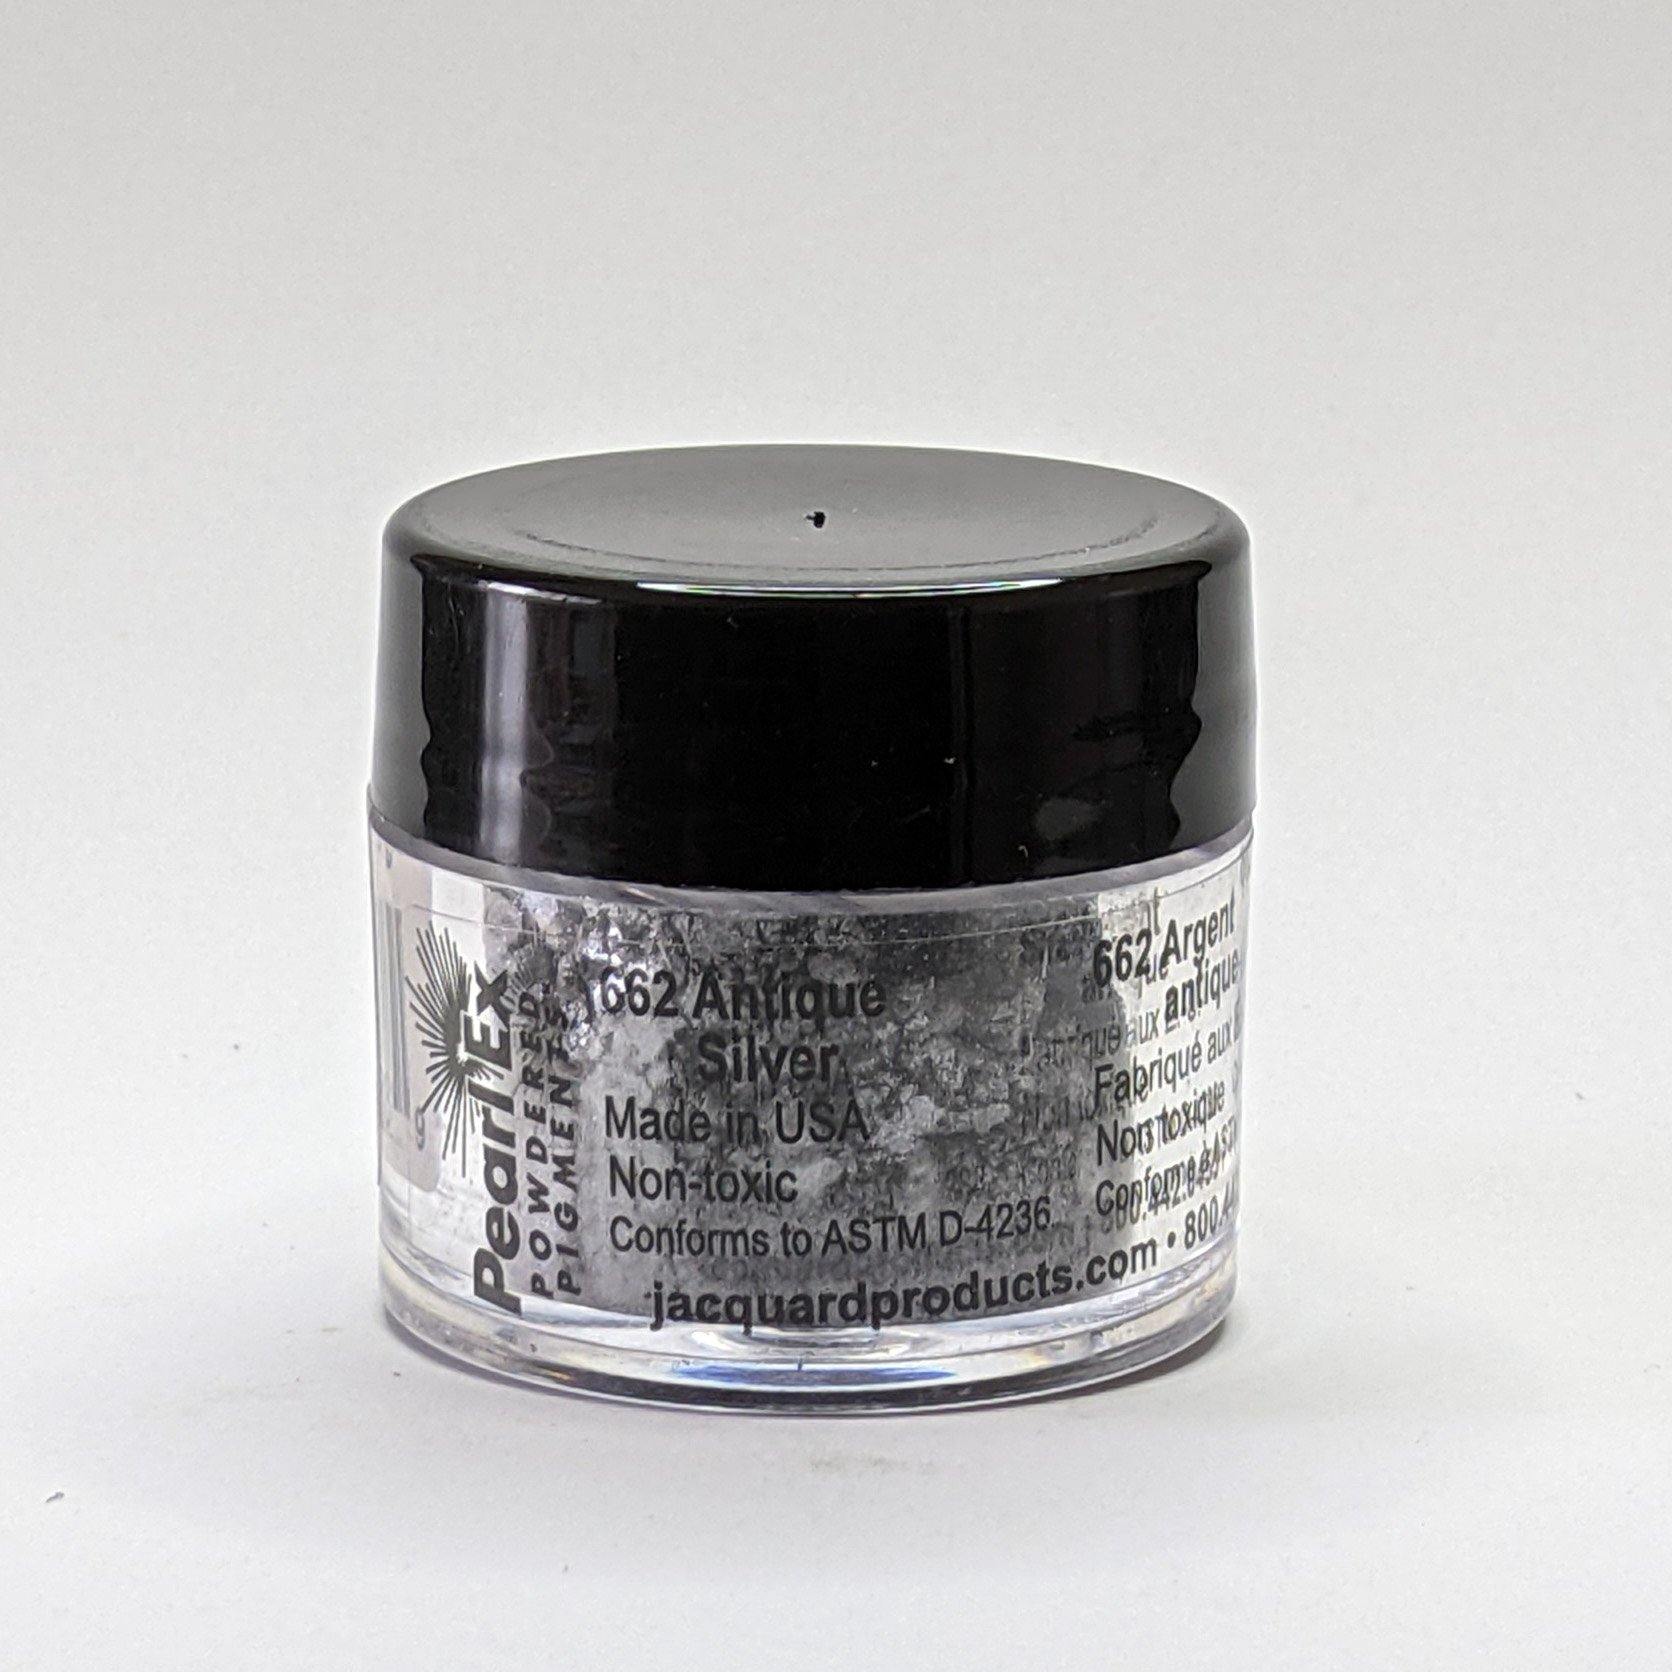 Antique Silver Pearl Ex Pigment 3g - Poethan